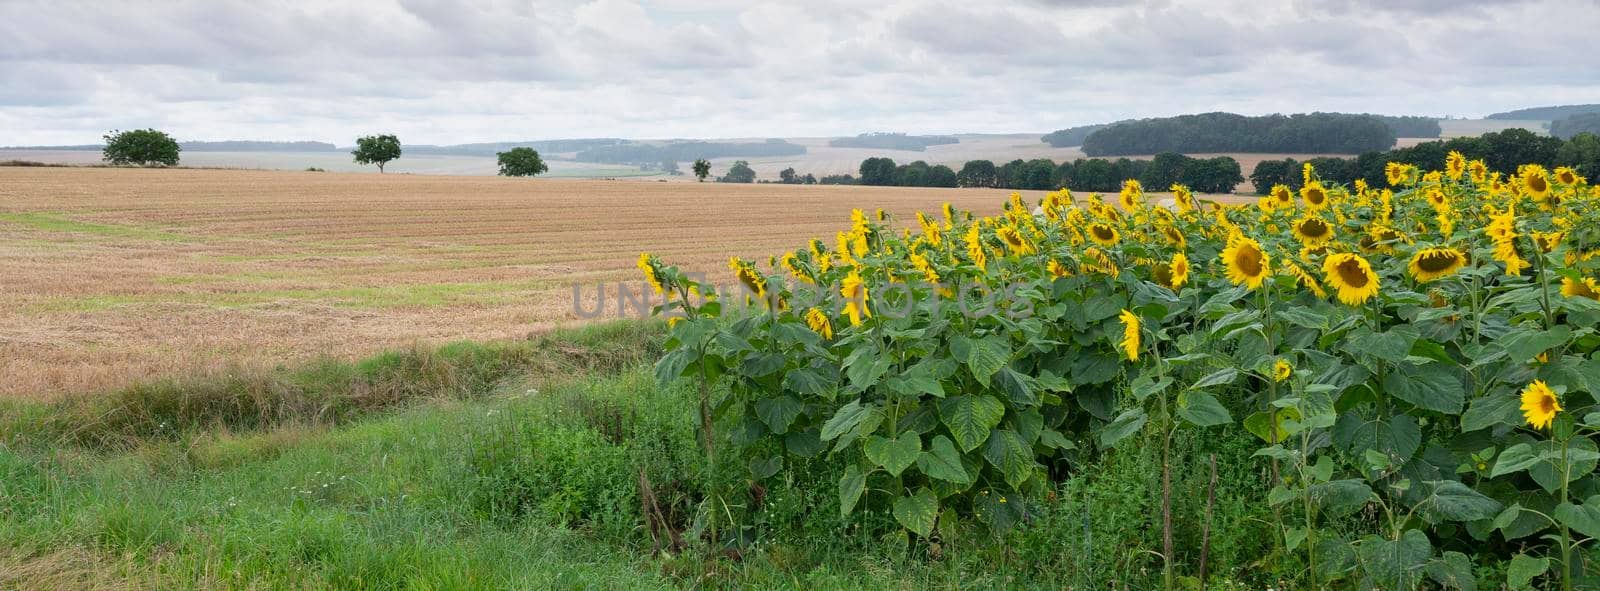 field of sunflowers in rural countryside of northern france near city of reims by ahavelaar